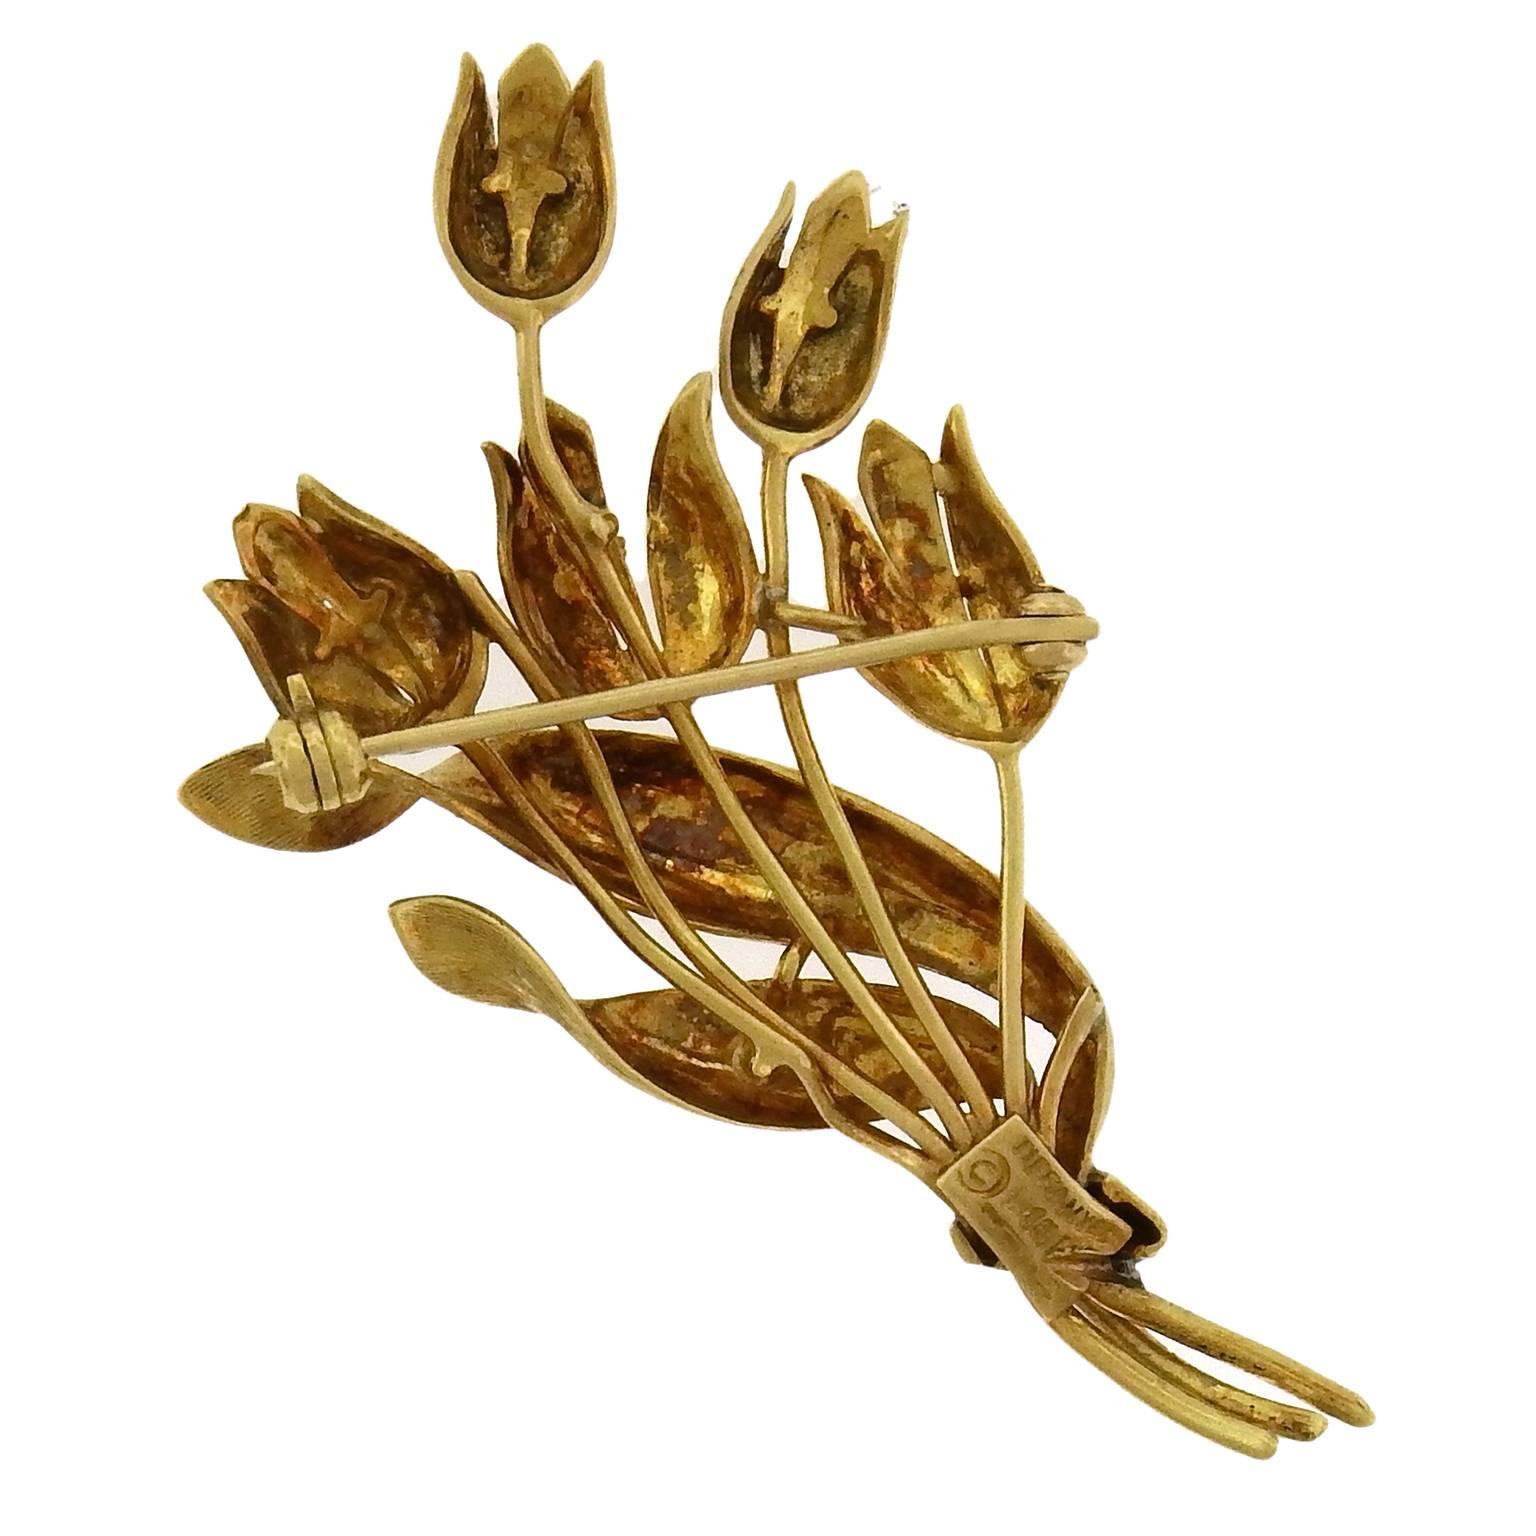 It is always spring when you are wearing Tiffany & Co 18K gold tulip brooch, the parrot tulips delineated in low relief, with the swirling etched leaves wrapping the bouquet. The brooch measures 1